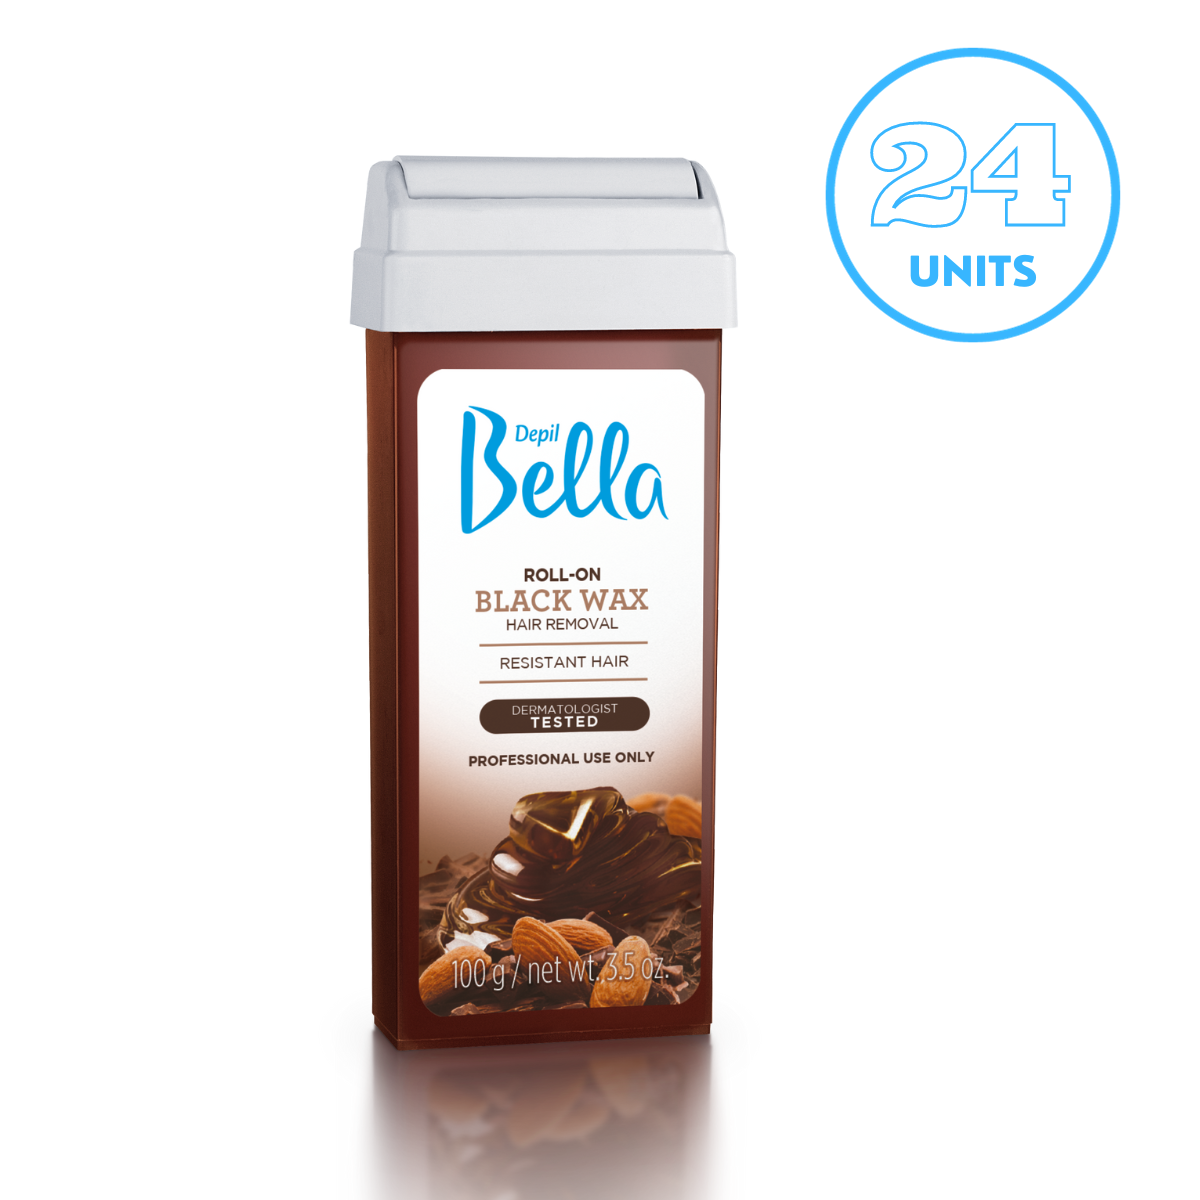 Depil Bella Roll-On Black Wax with Almond and Cocoa Oils - 3.52oz (24 Units Offer) - Buy professional cosmetics dedicated to hair removal